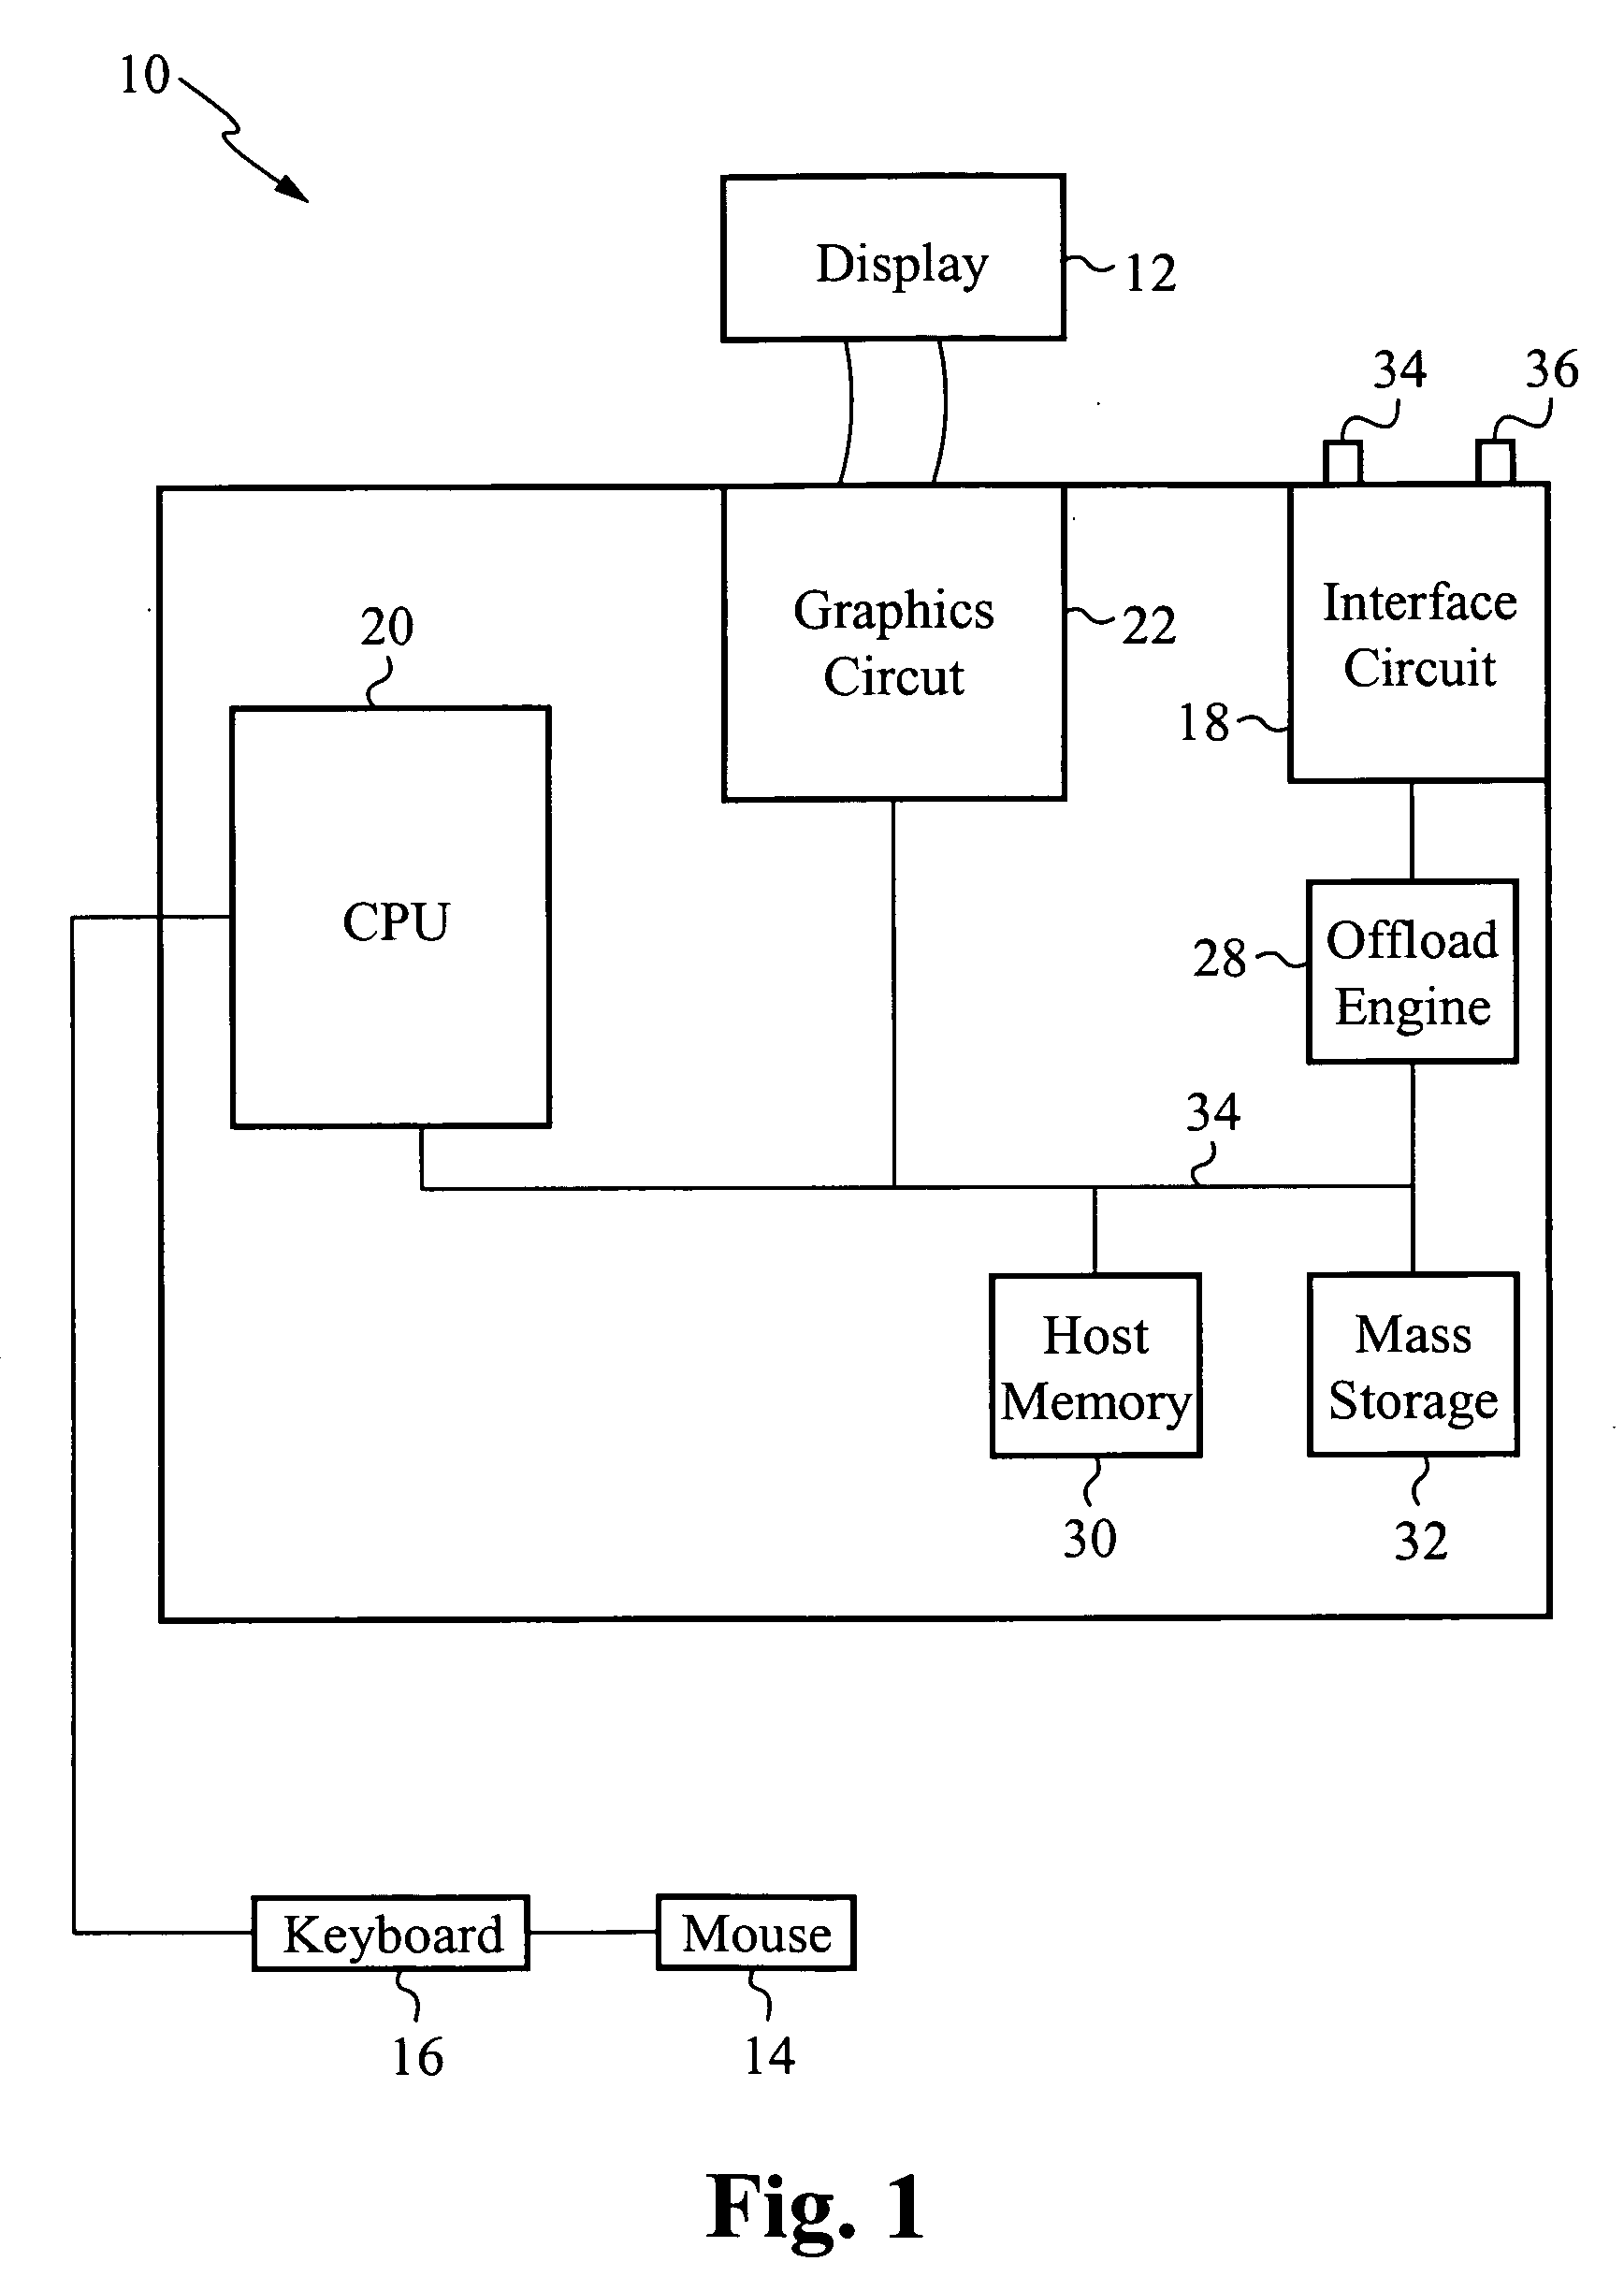 Off-load engine to re-sequence data packets within host memory